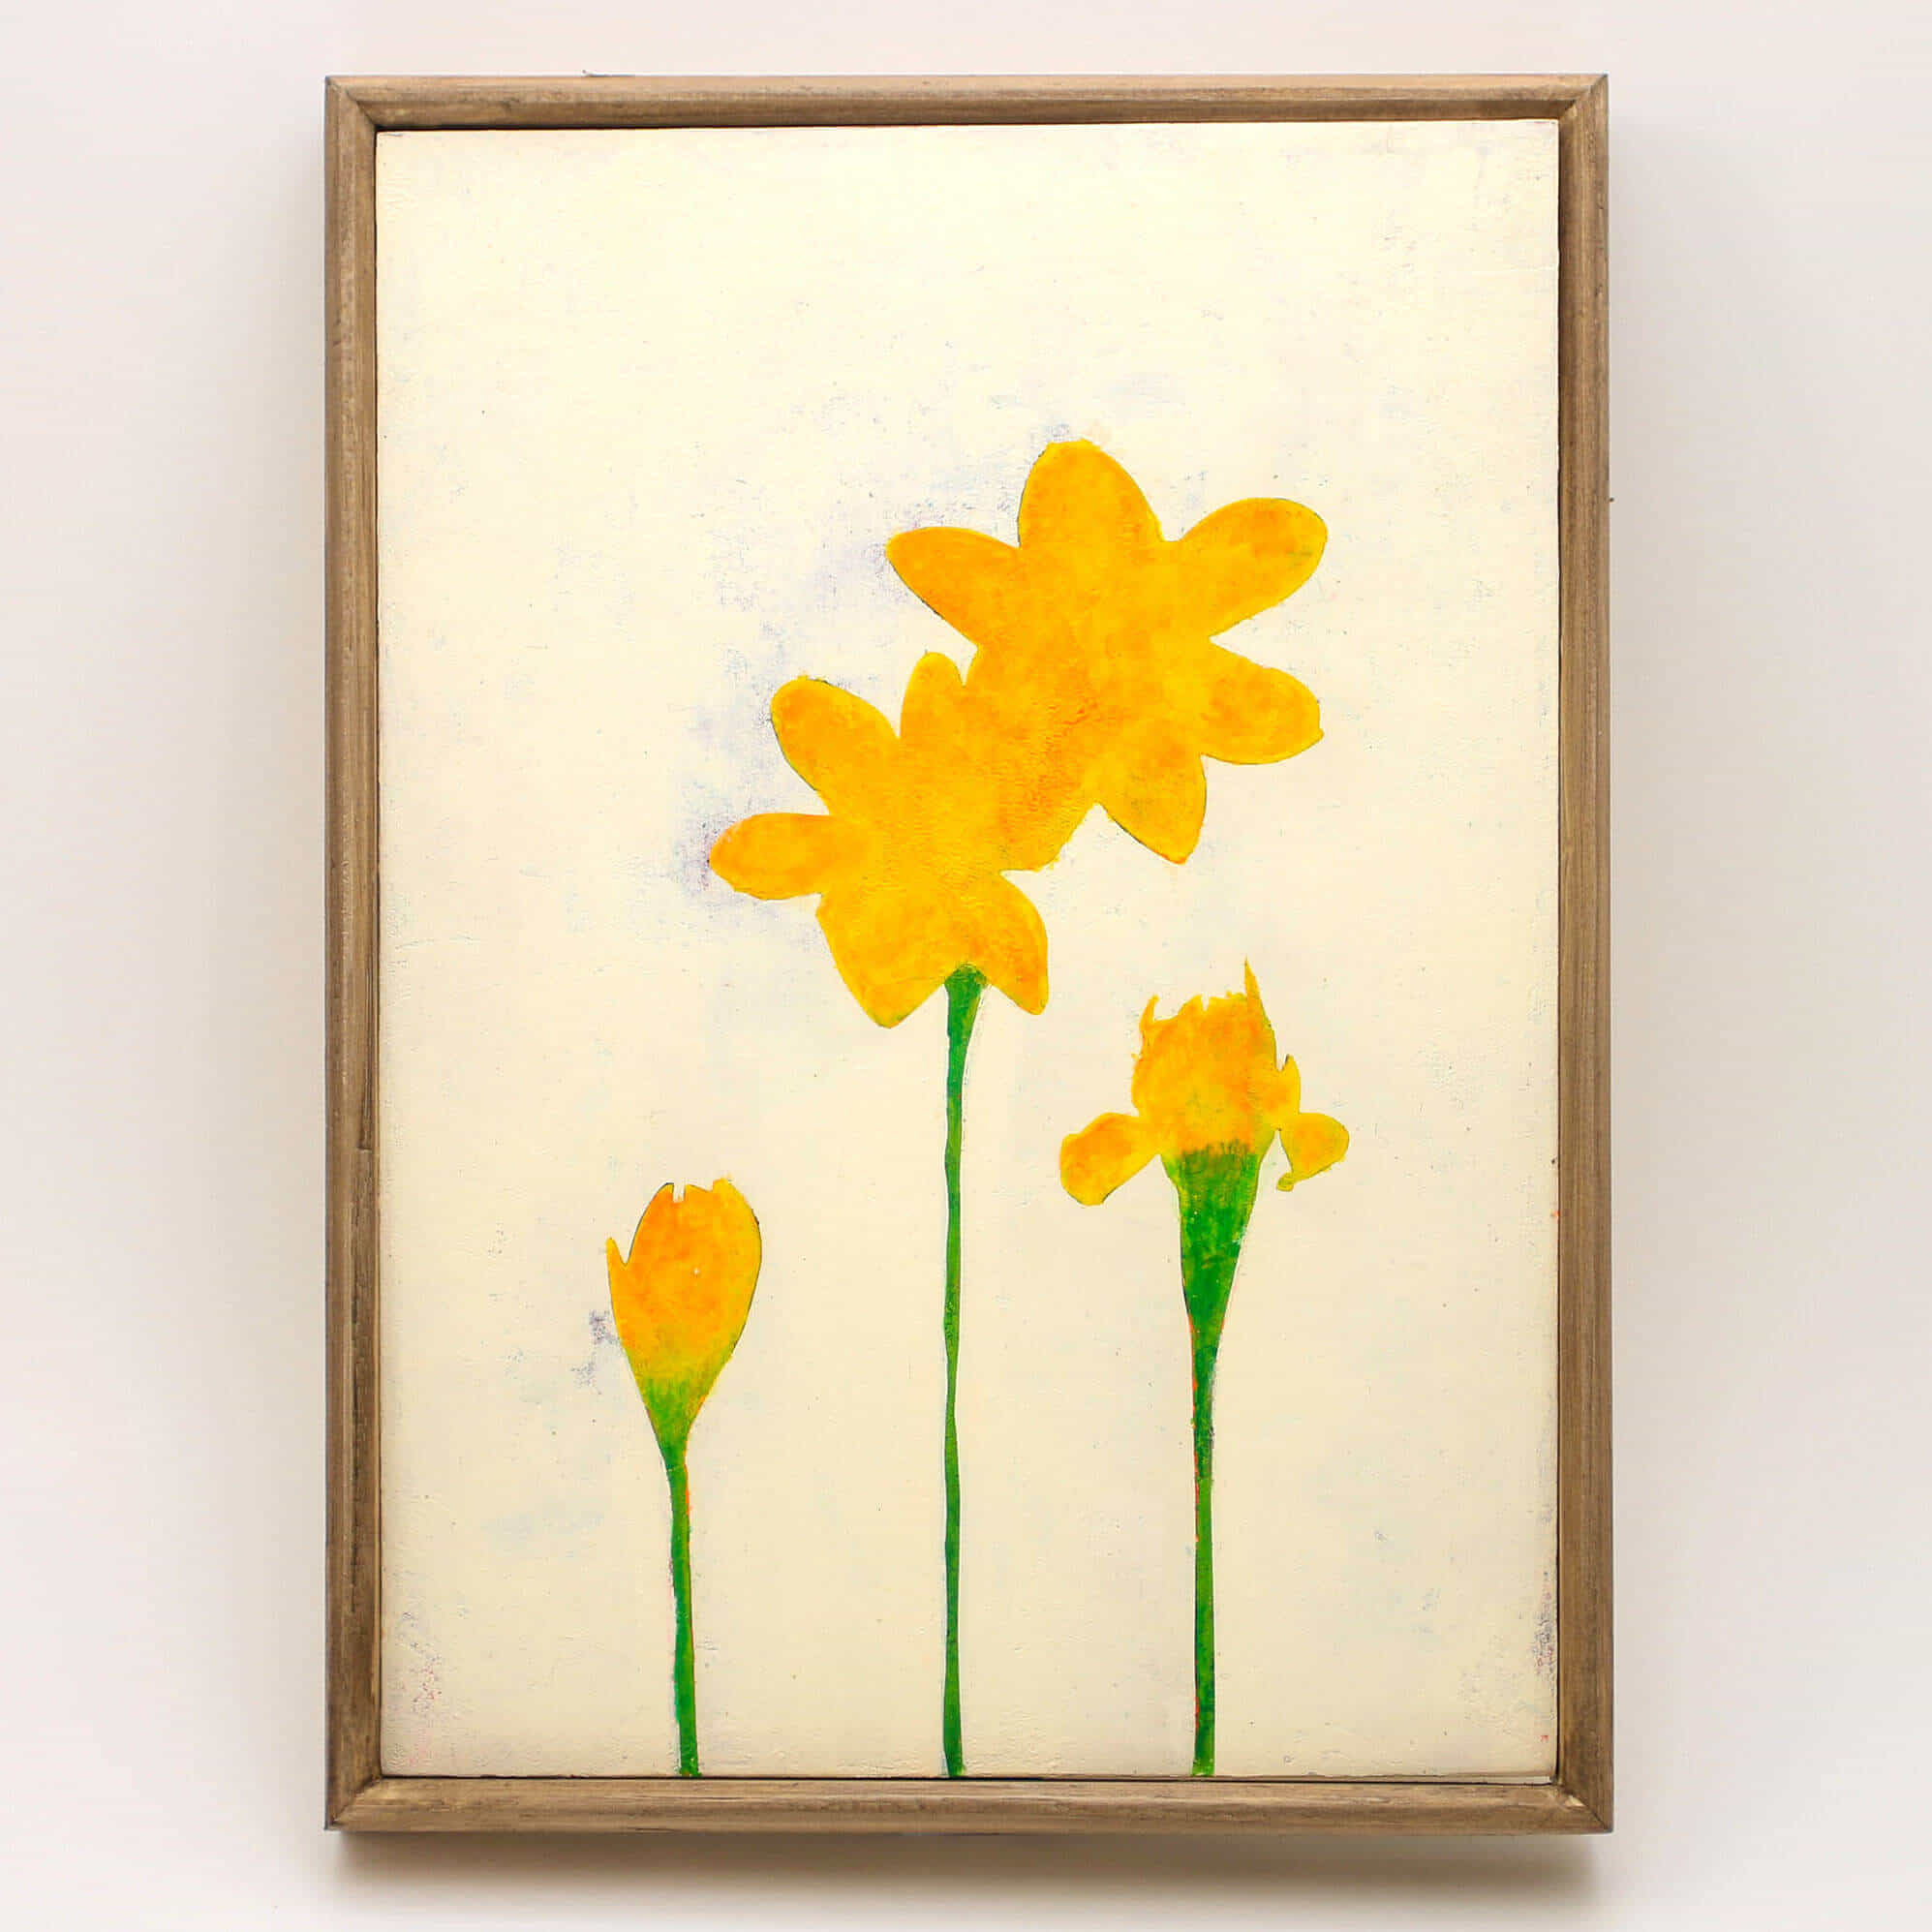 Yellow narcissus flowers No.191